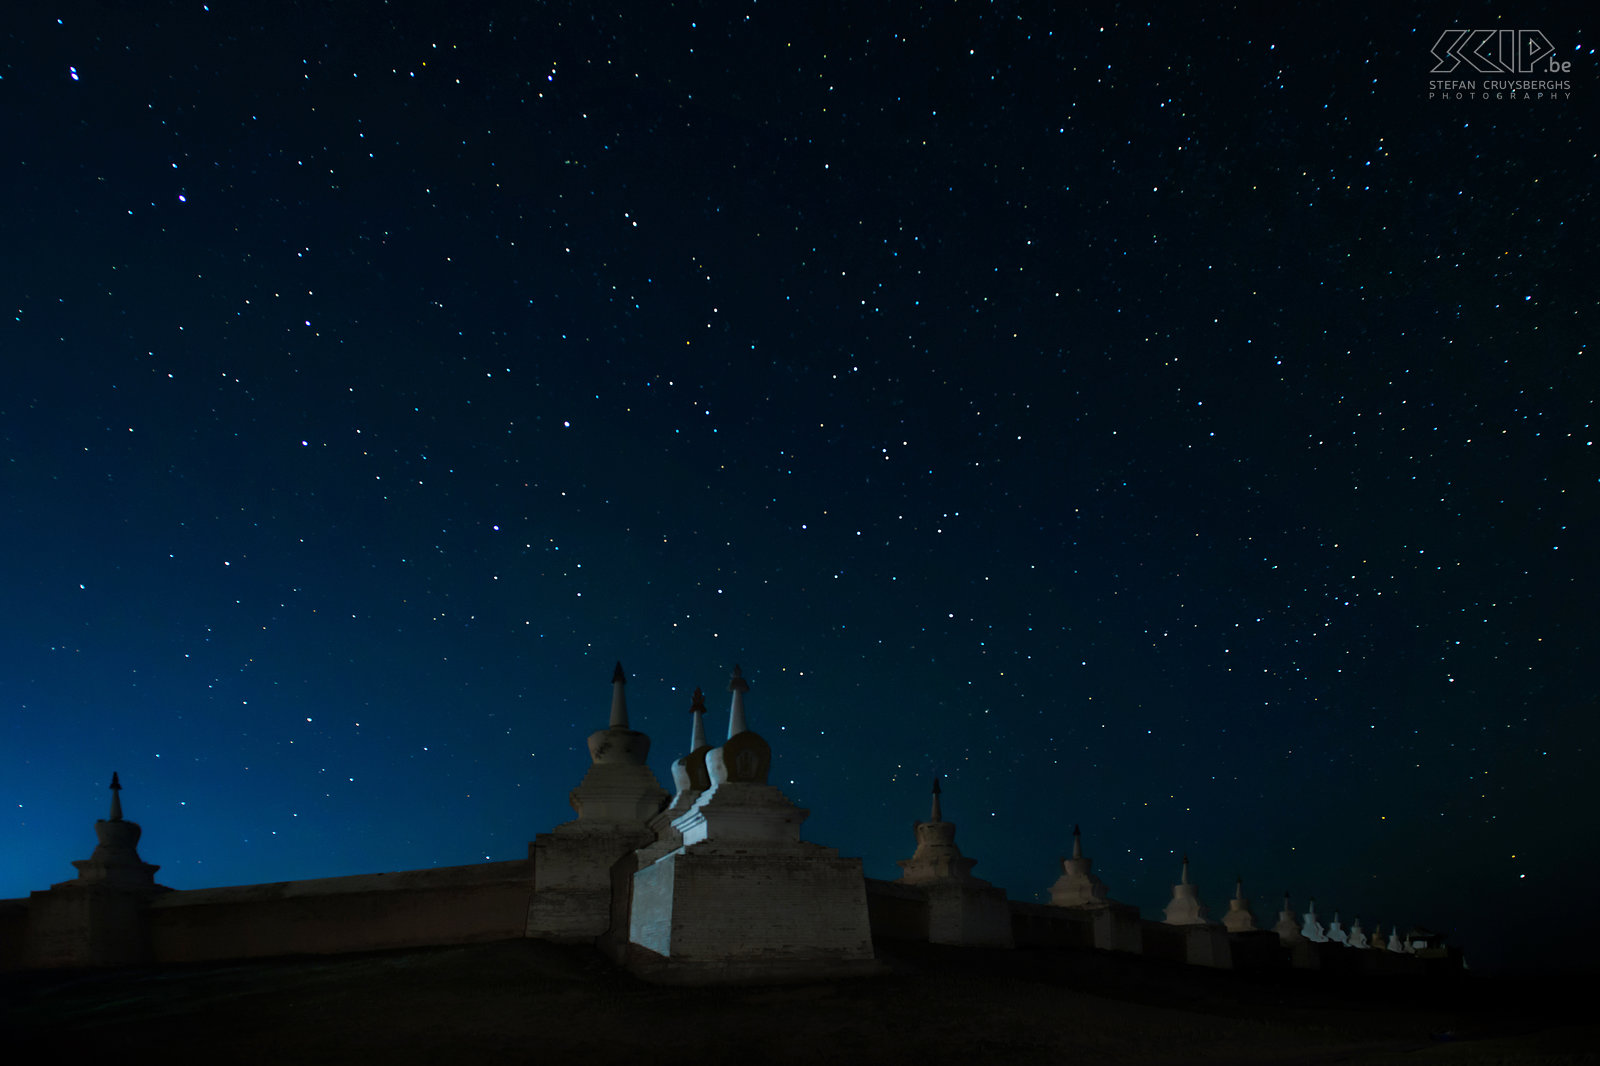 Kharkhorin - Erdene Zuu by night Night photo of Erdene Zuu in Kharkhorin/Karakorum in central Mongolia. Together with my girlfriend I returned in the evening to the great outer walls with stupas of this ancient Buddhist monastery.  Stefan Cruysberghs